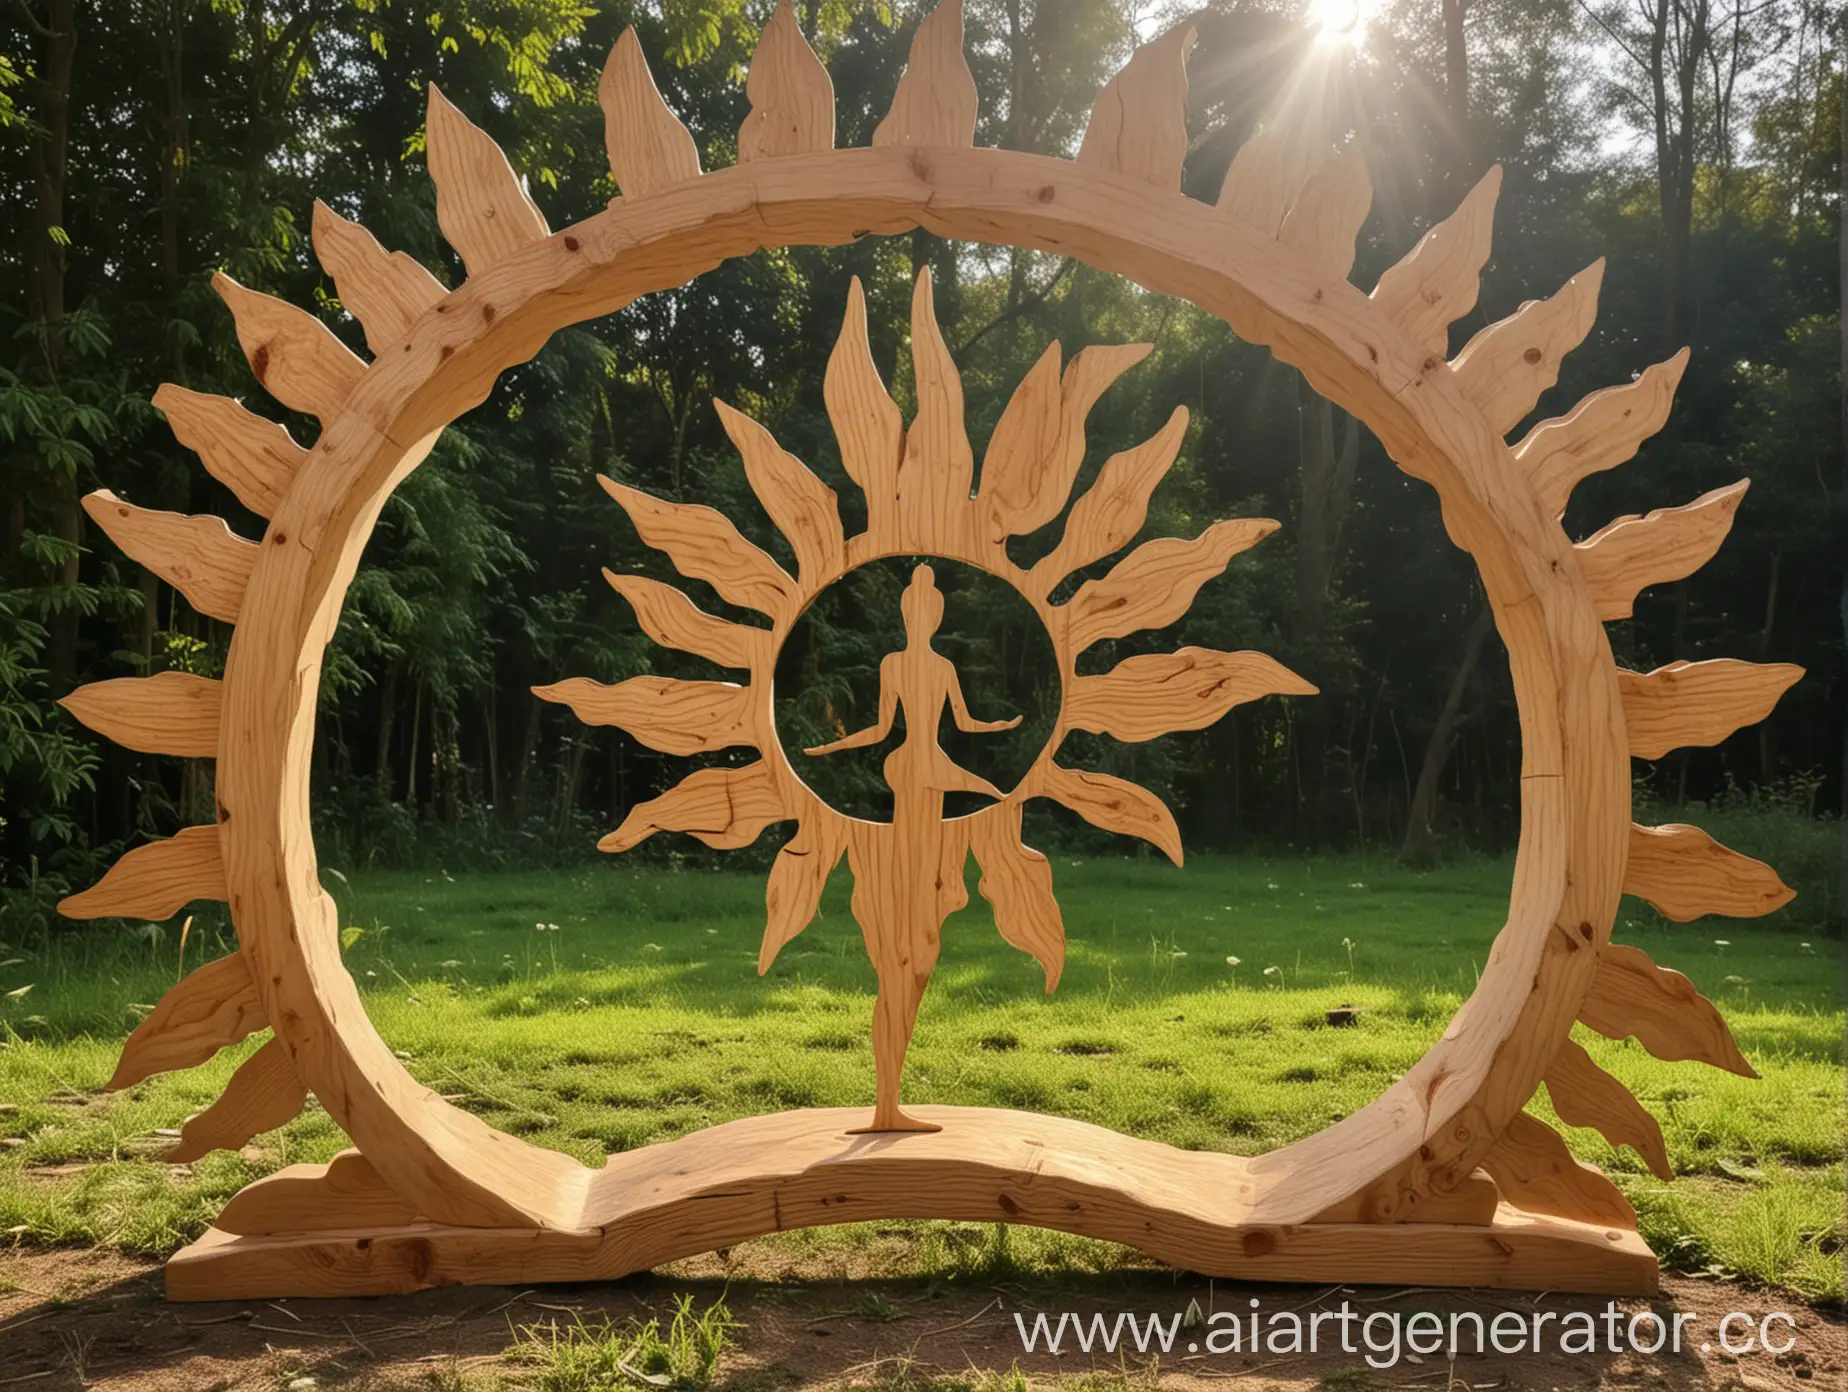 Wooden-Sun-Arch-with-Yoga-Pose